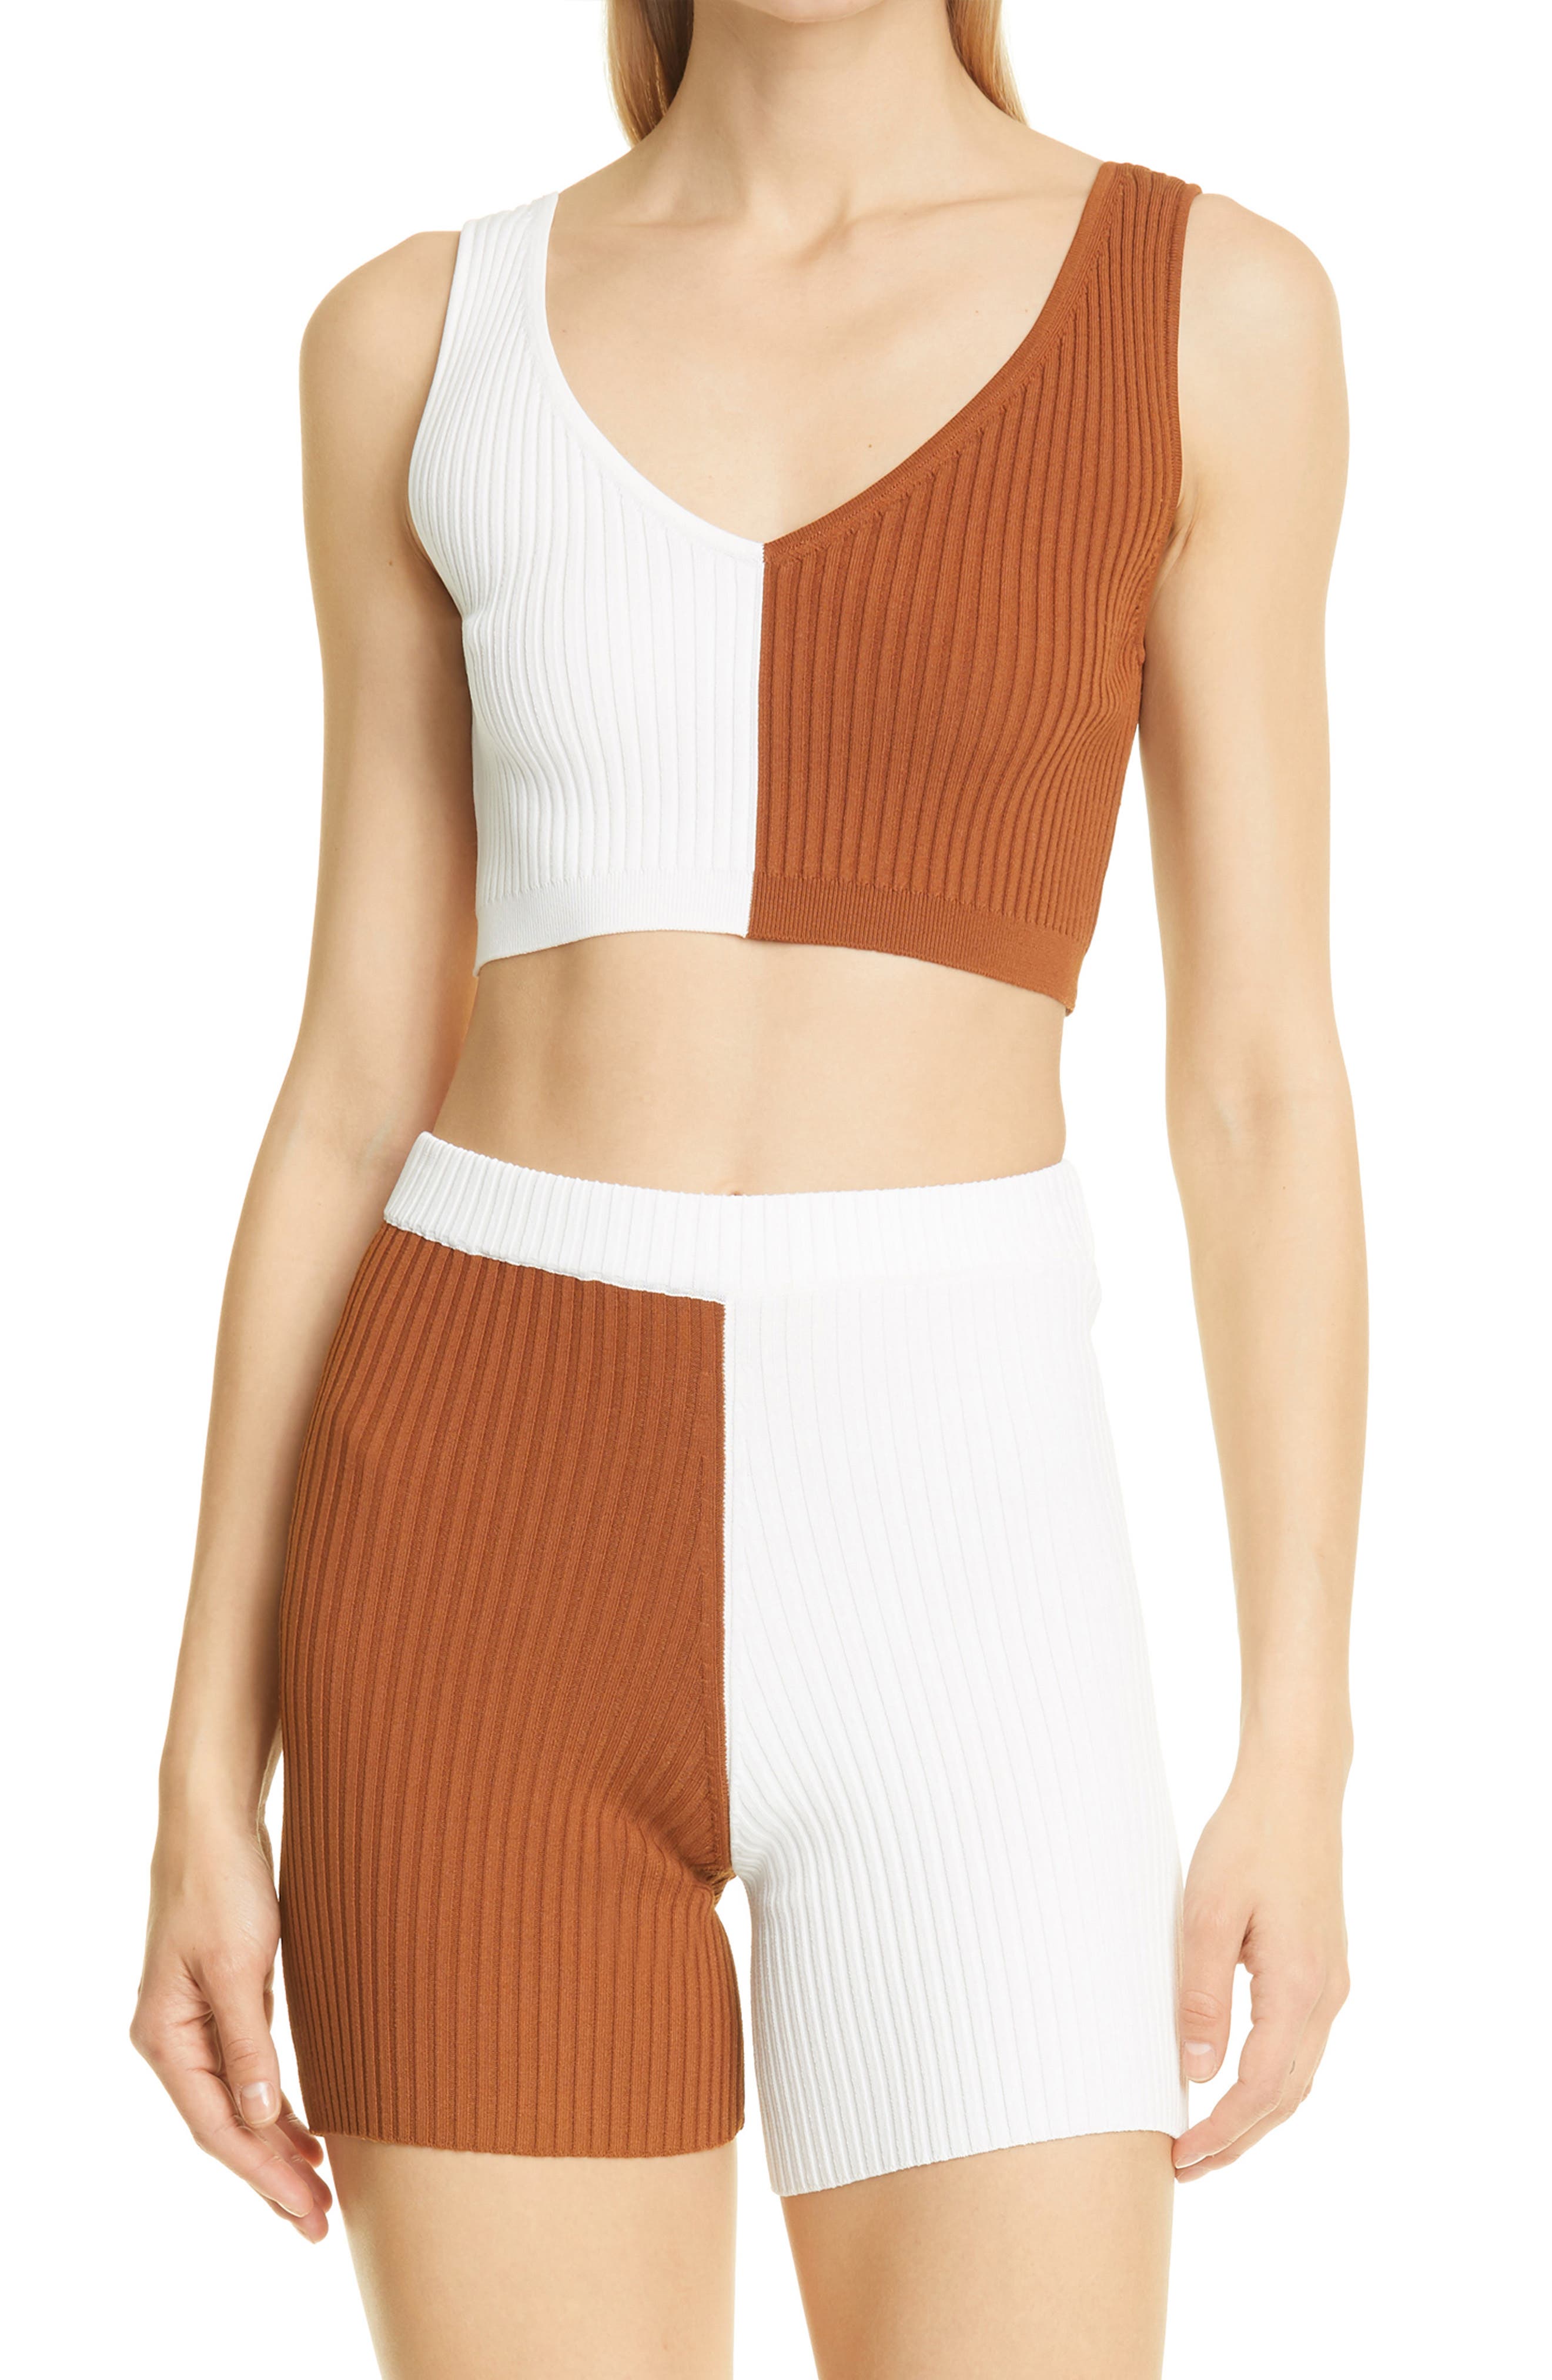 STAUD Hana Colorblock Crop Tank in White/Tan at Nordstrom, Size Large